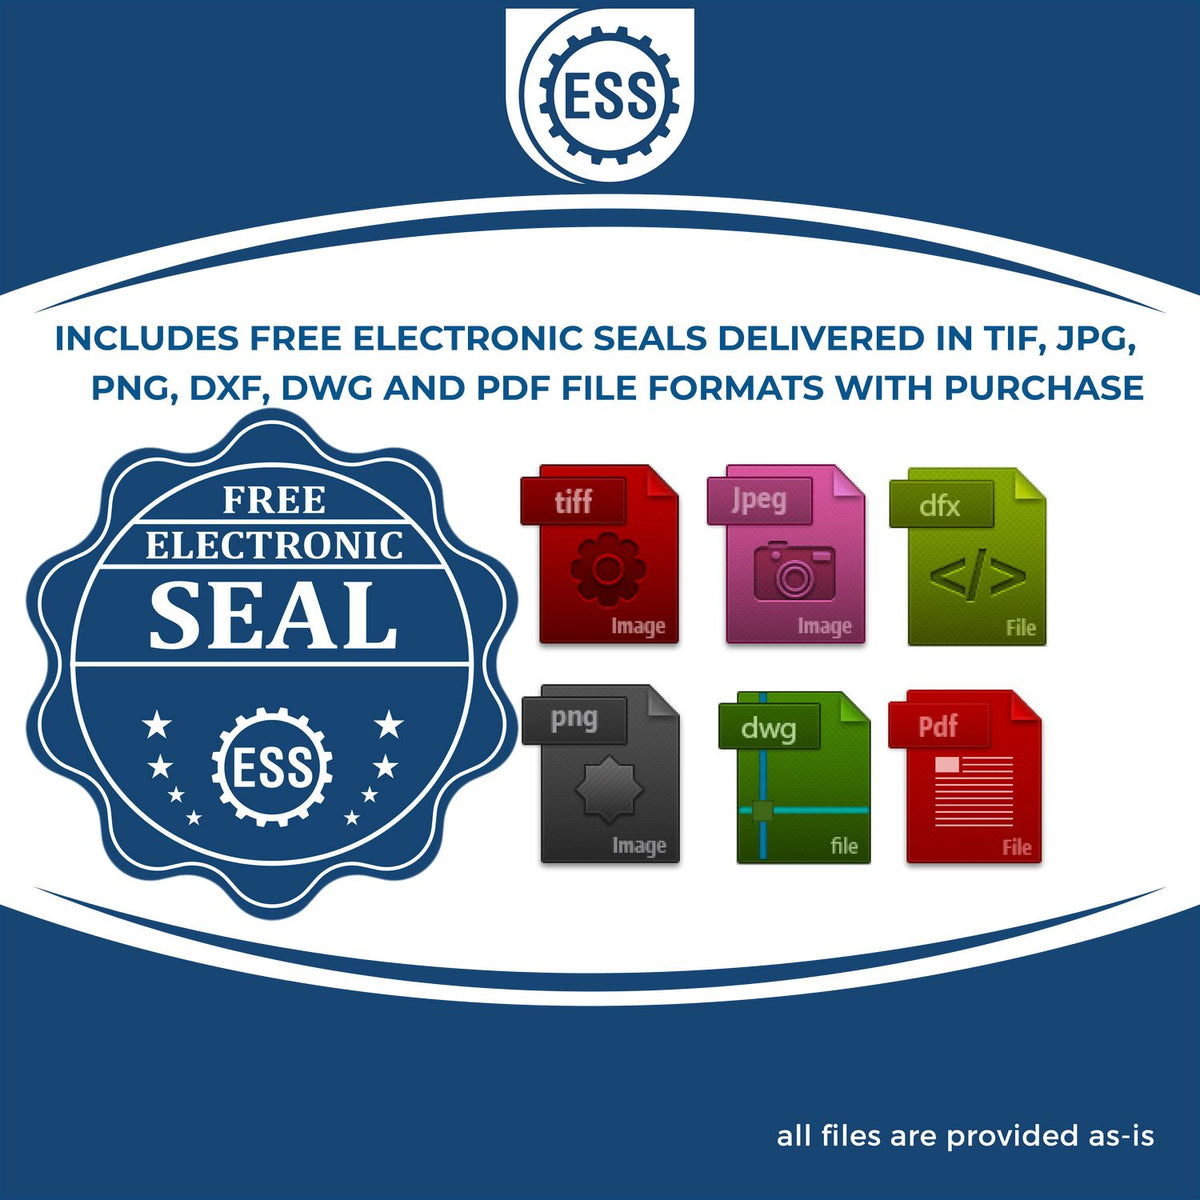 An infographic for the free electronic seal for the Long Reach Kansas PE Seal illustrating the different file type icons such as DXF, DWG, TIF, JPG and PNG.